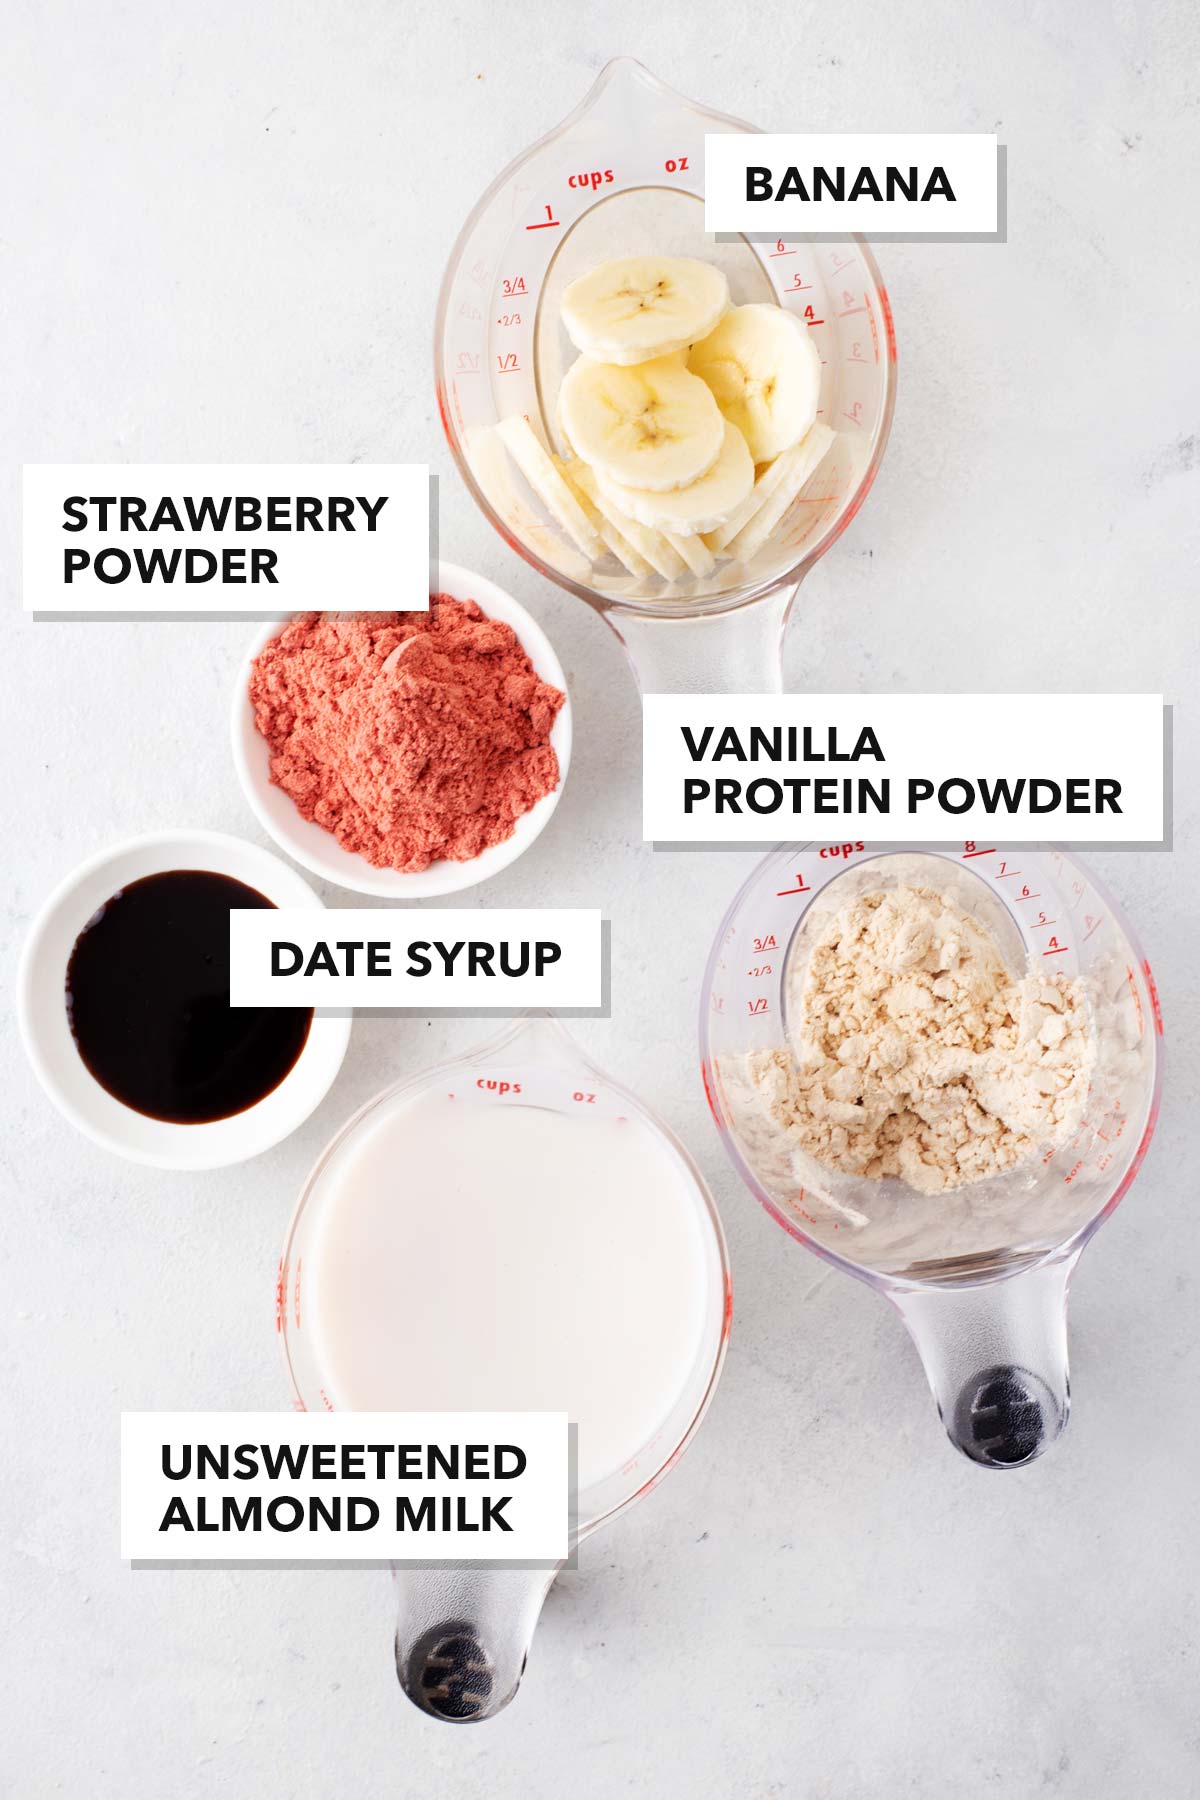 Ingredients for a strawberry banana protein shake on a gray table.